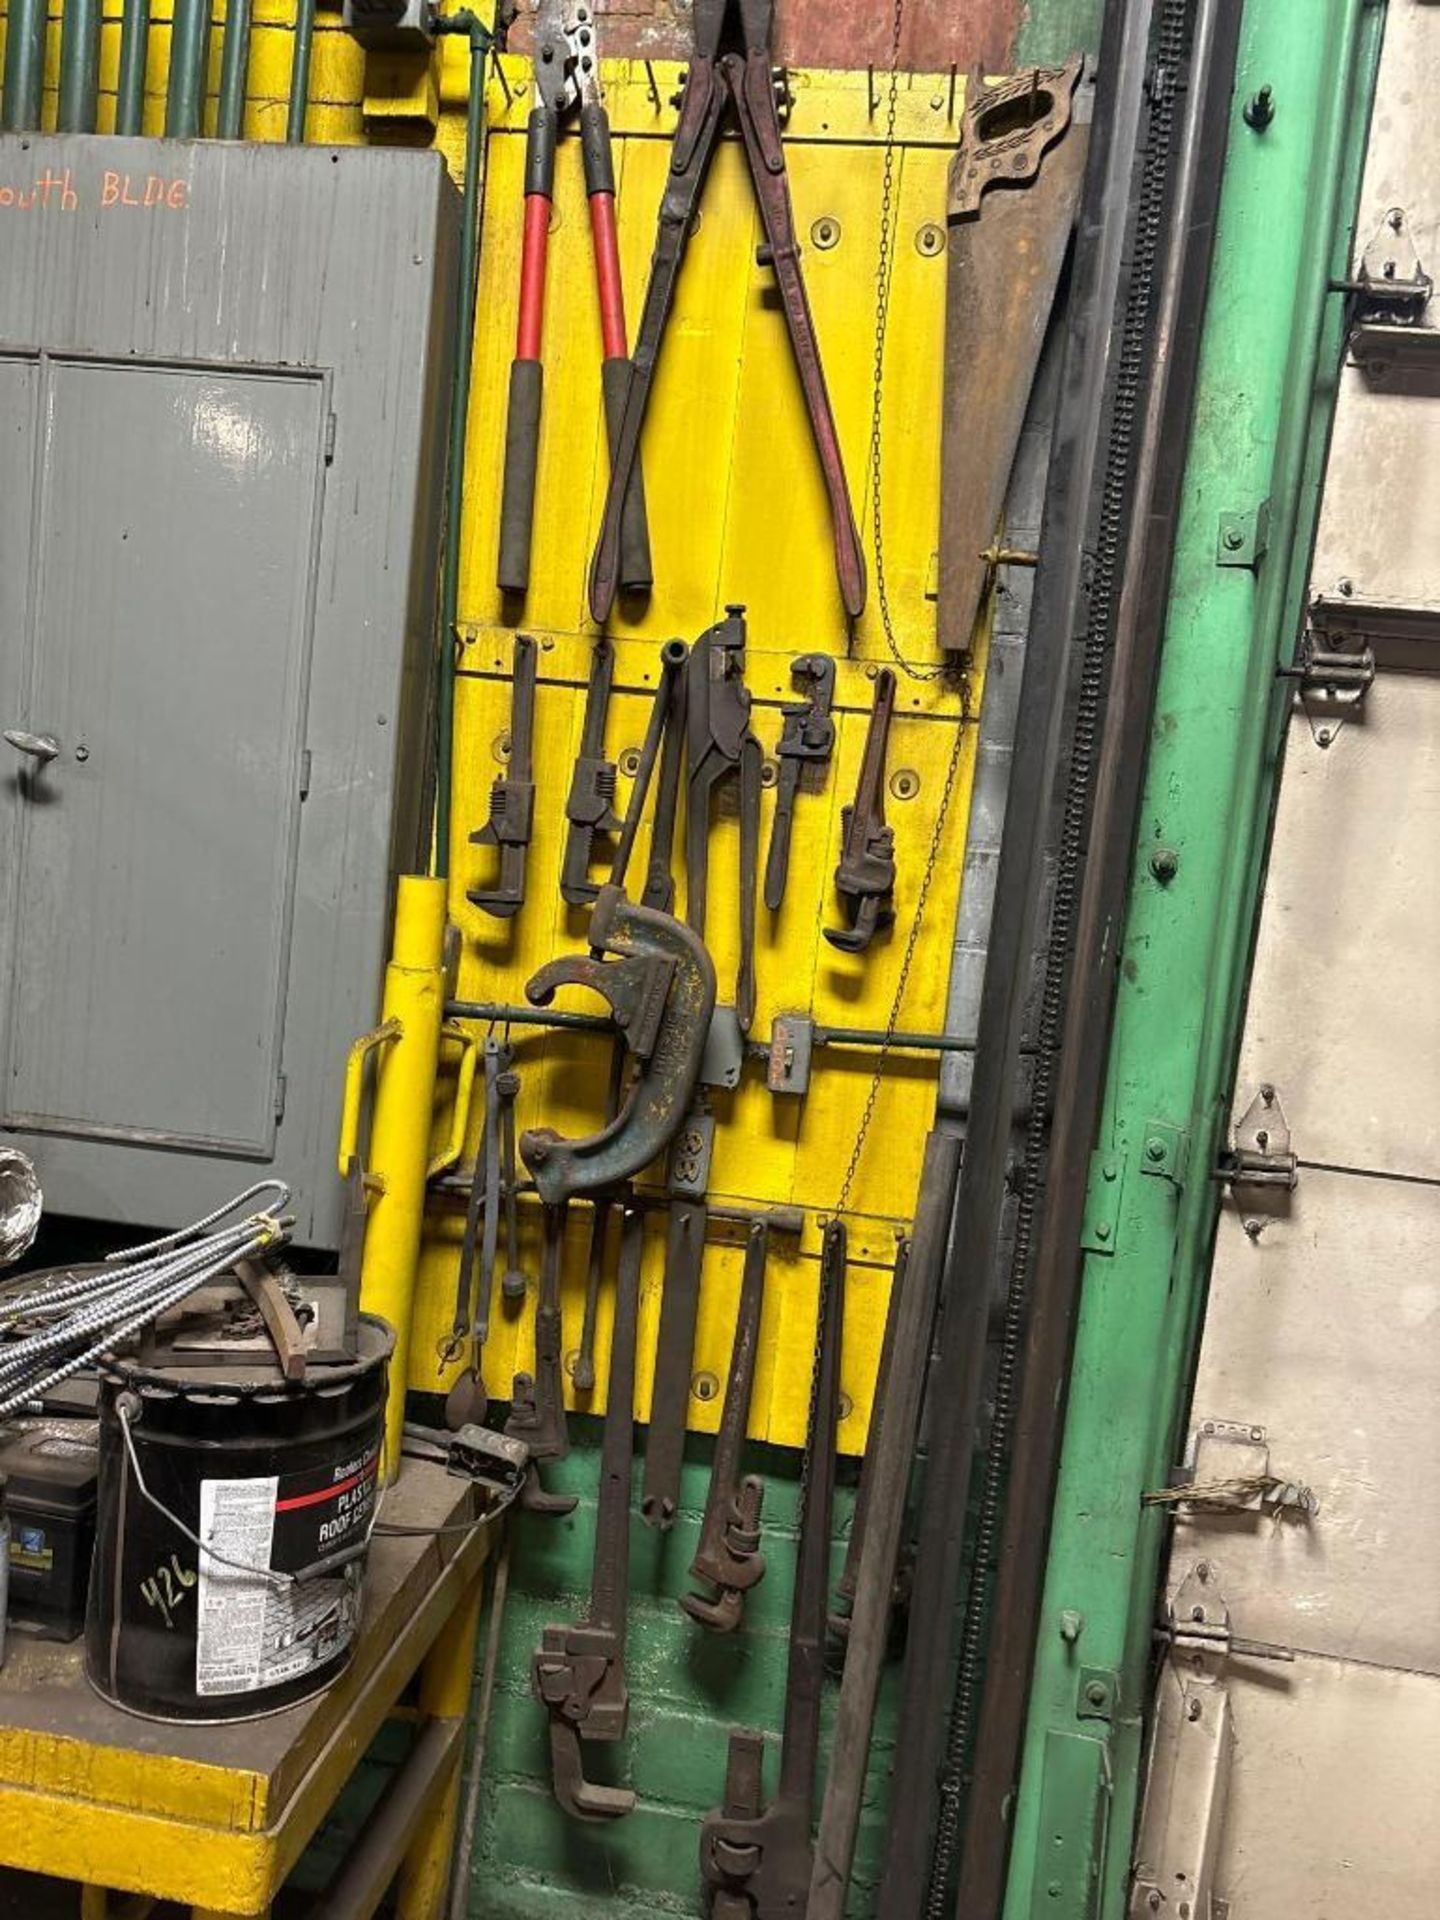 Wall of Pipe Cutters, Pipe Wrenches, and Bolt Cutters